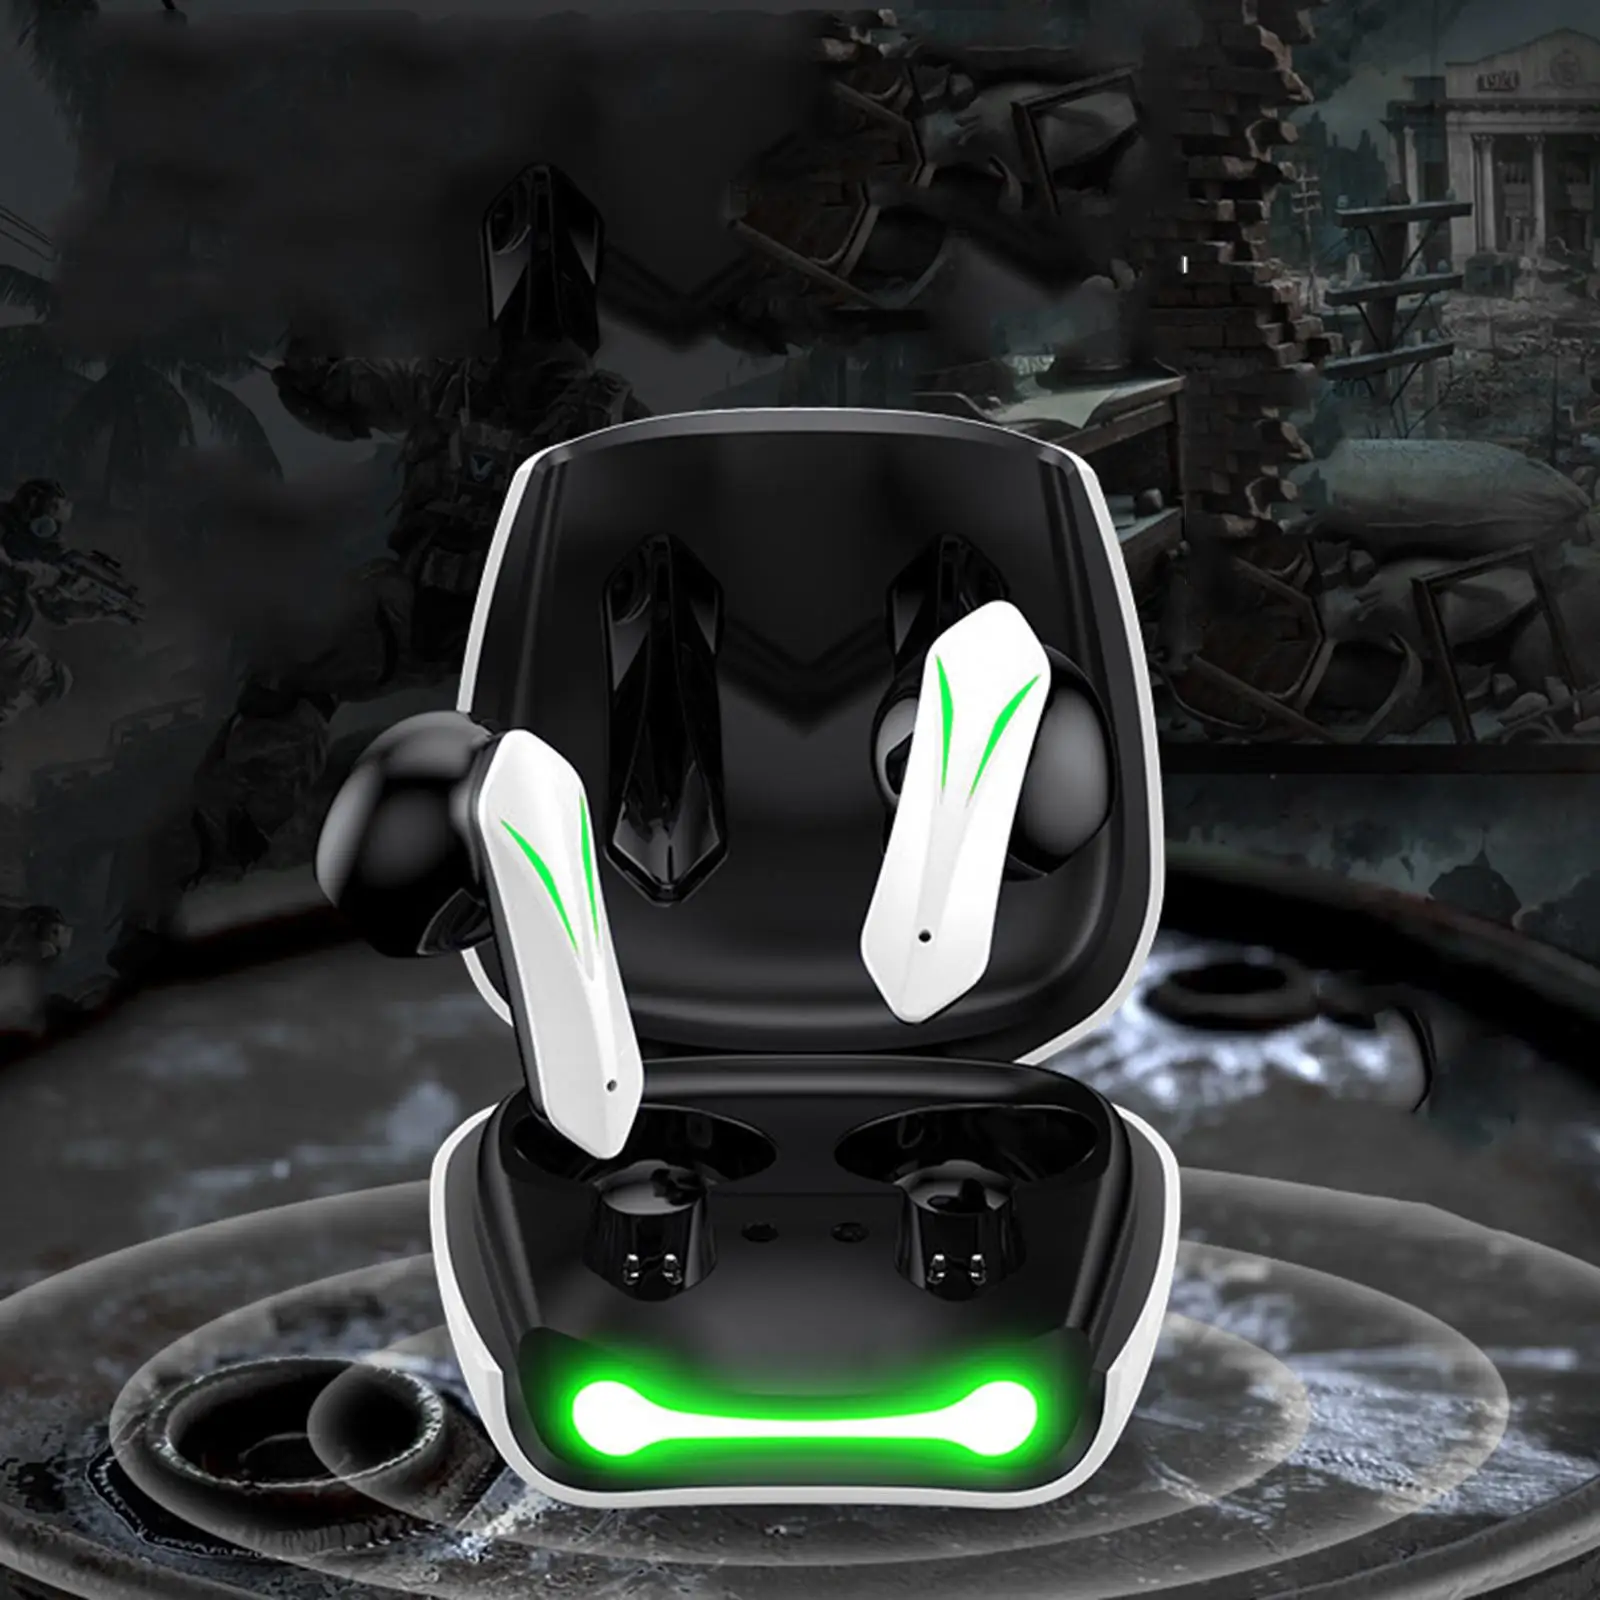 Bluetooth Headset 13mm Moving Coil in Ear for Conversation Music